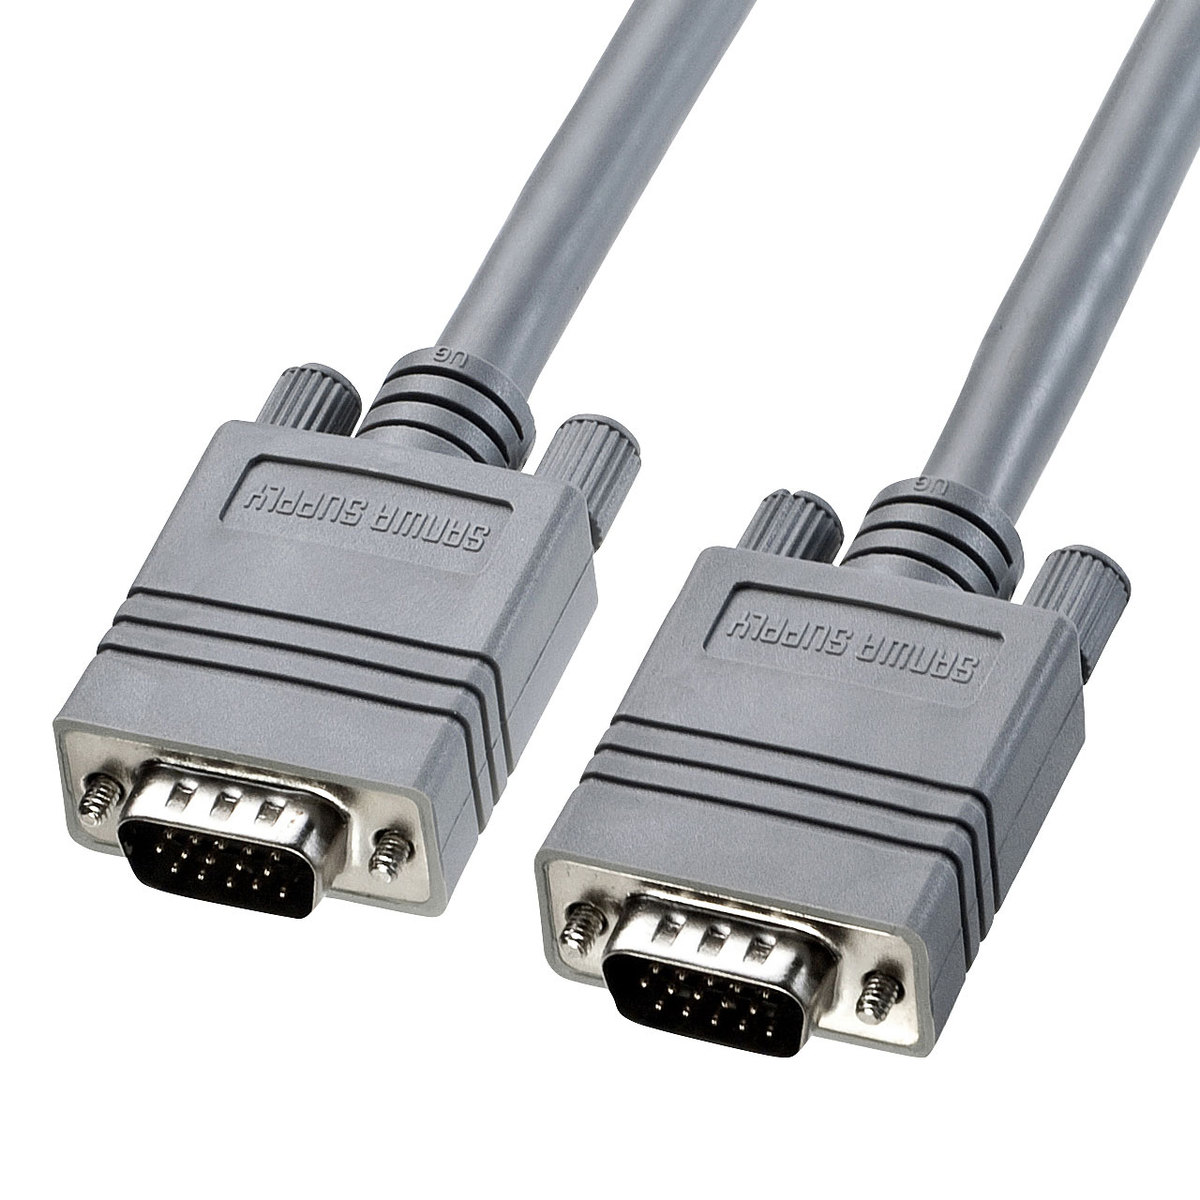 Display Cables - Compound Coaxial